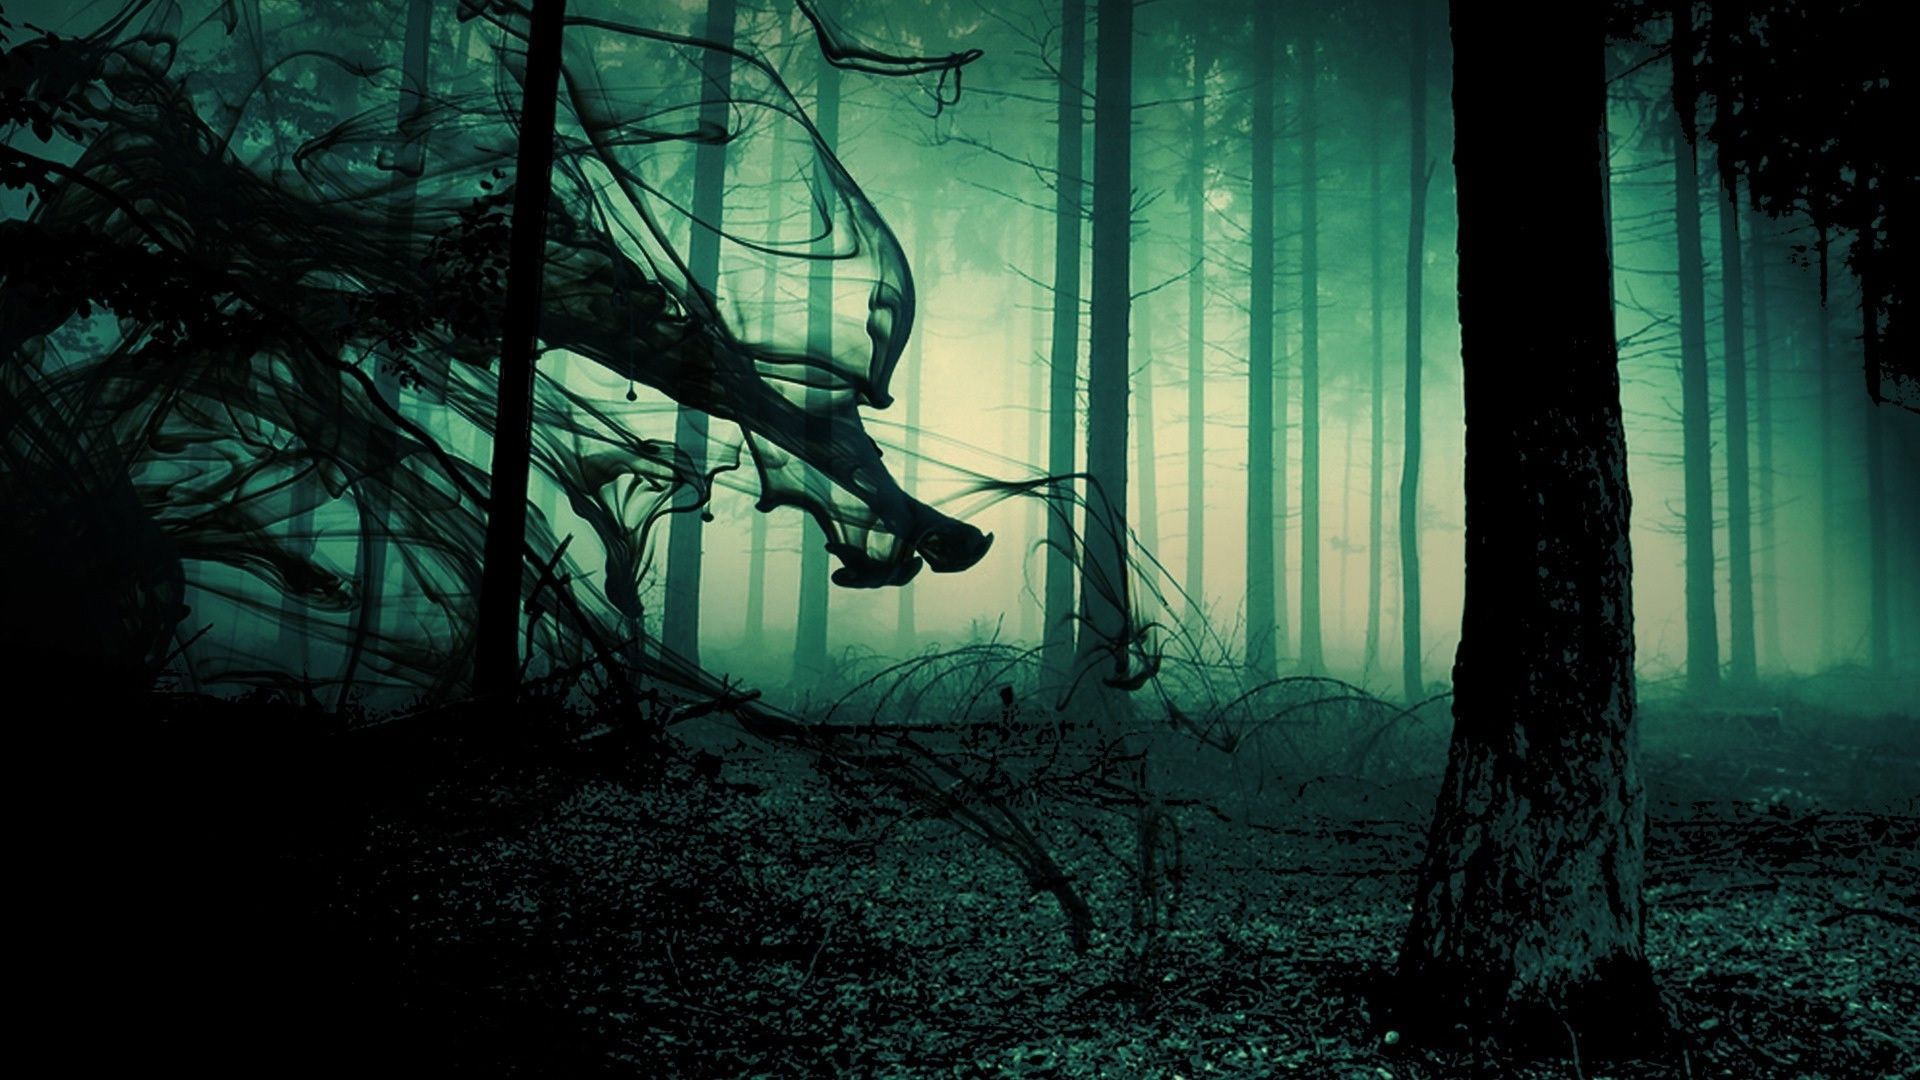 Spooky forest background - Google Search Backgrounds and other